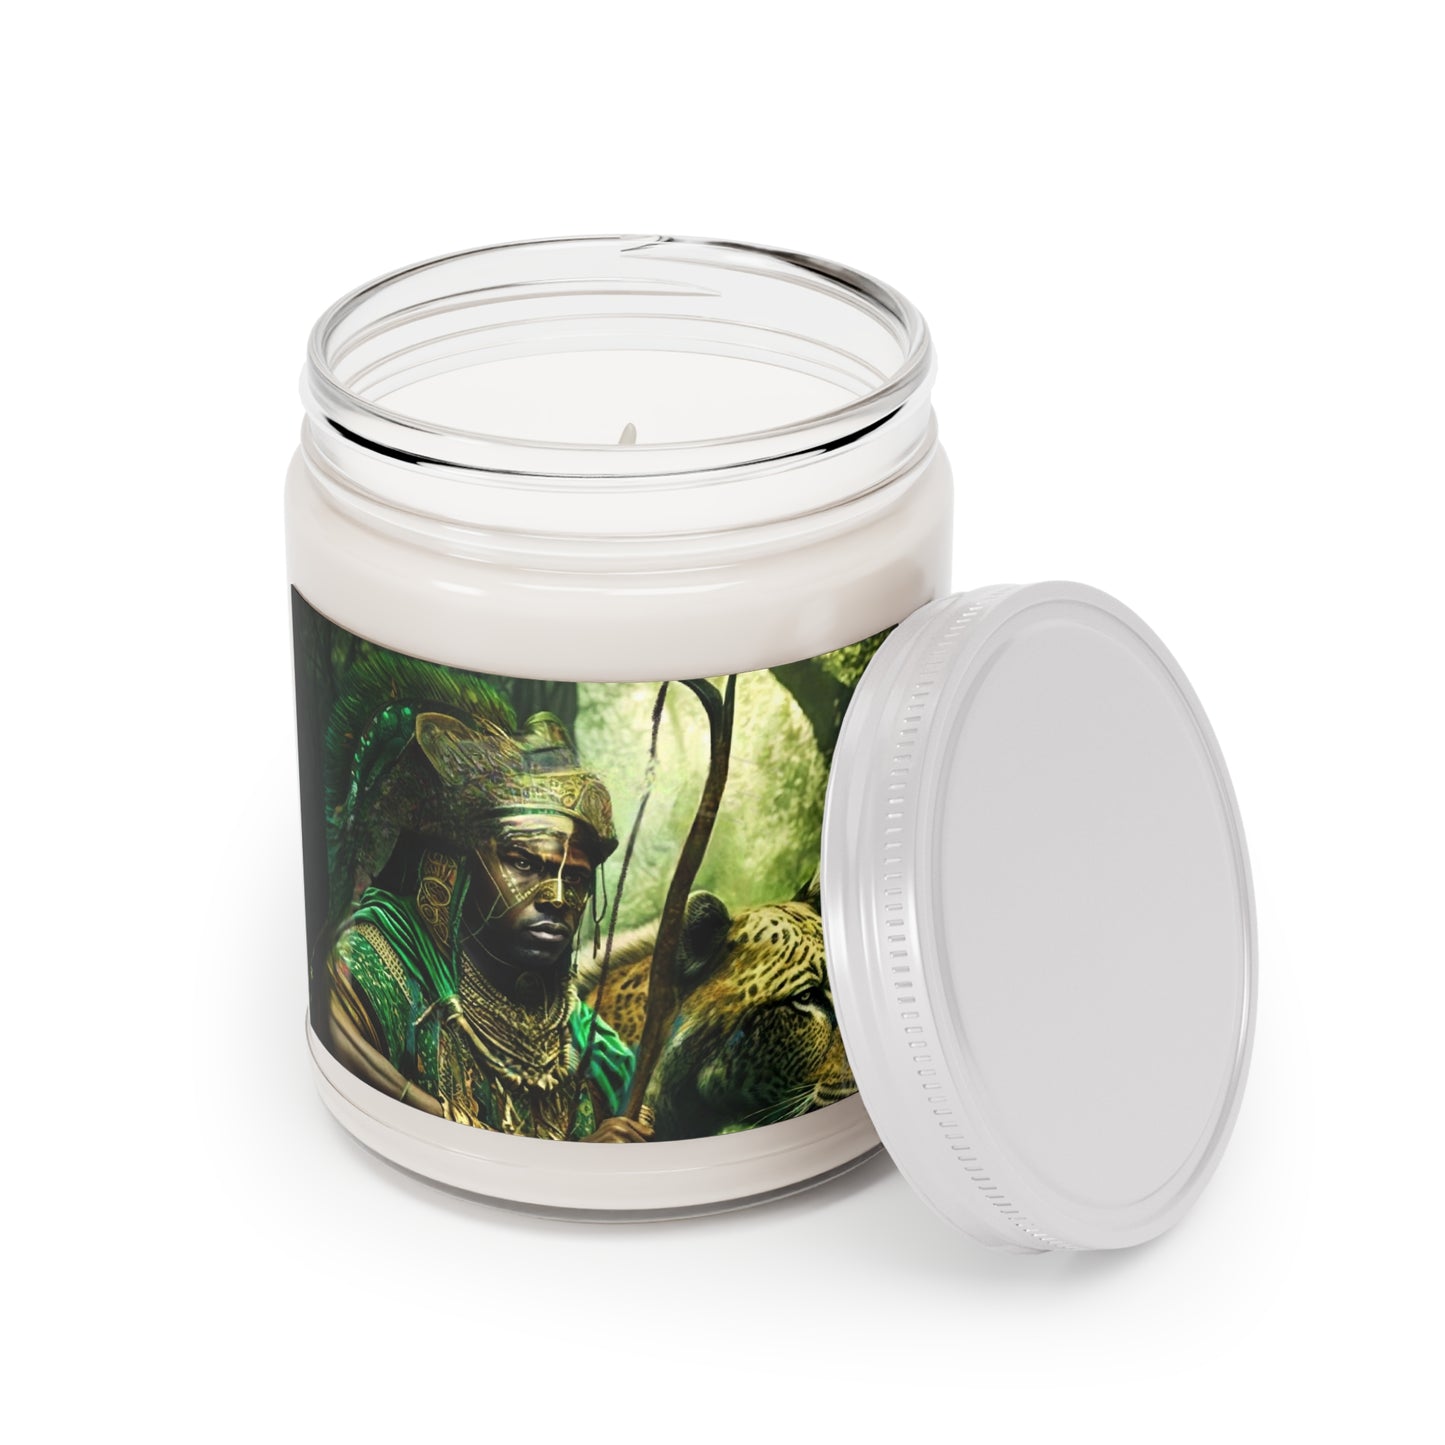 Osoosi Scented Candles, 9oz